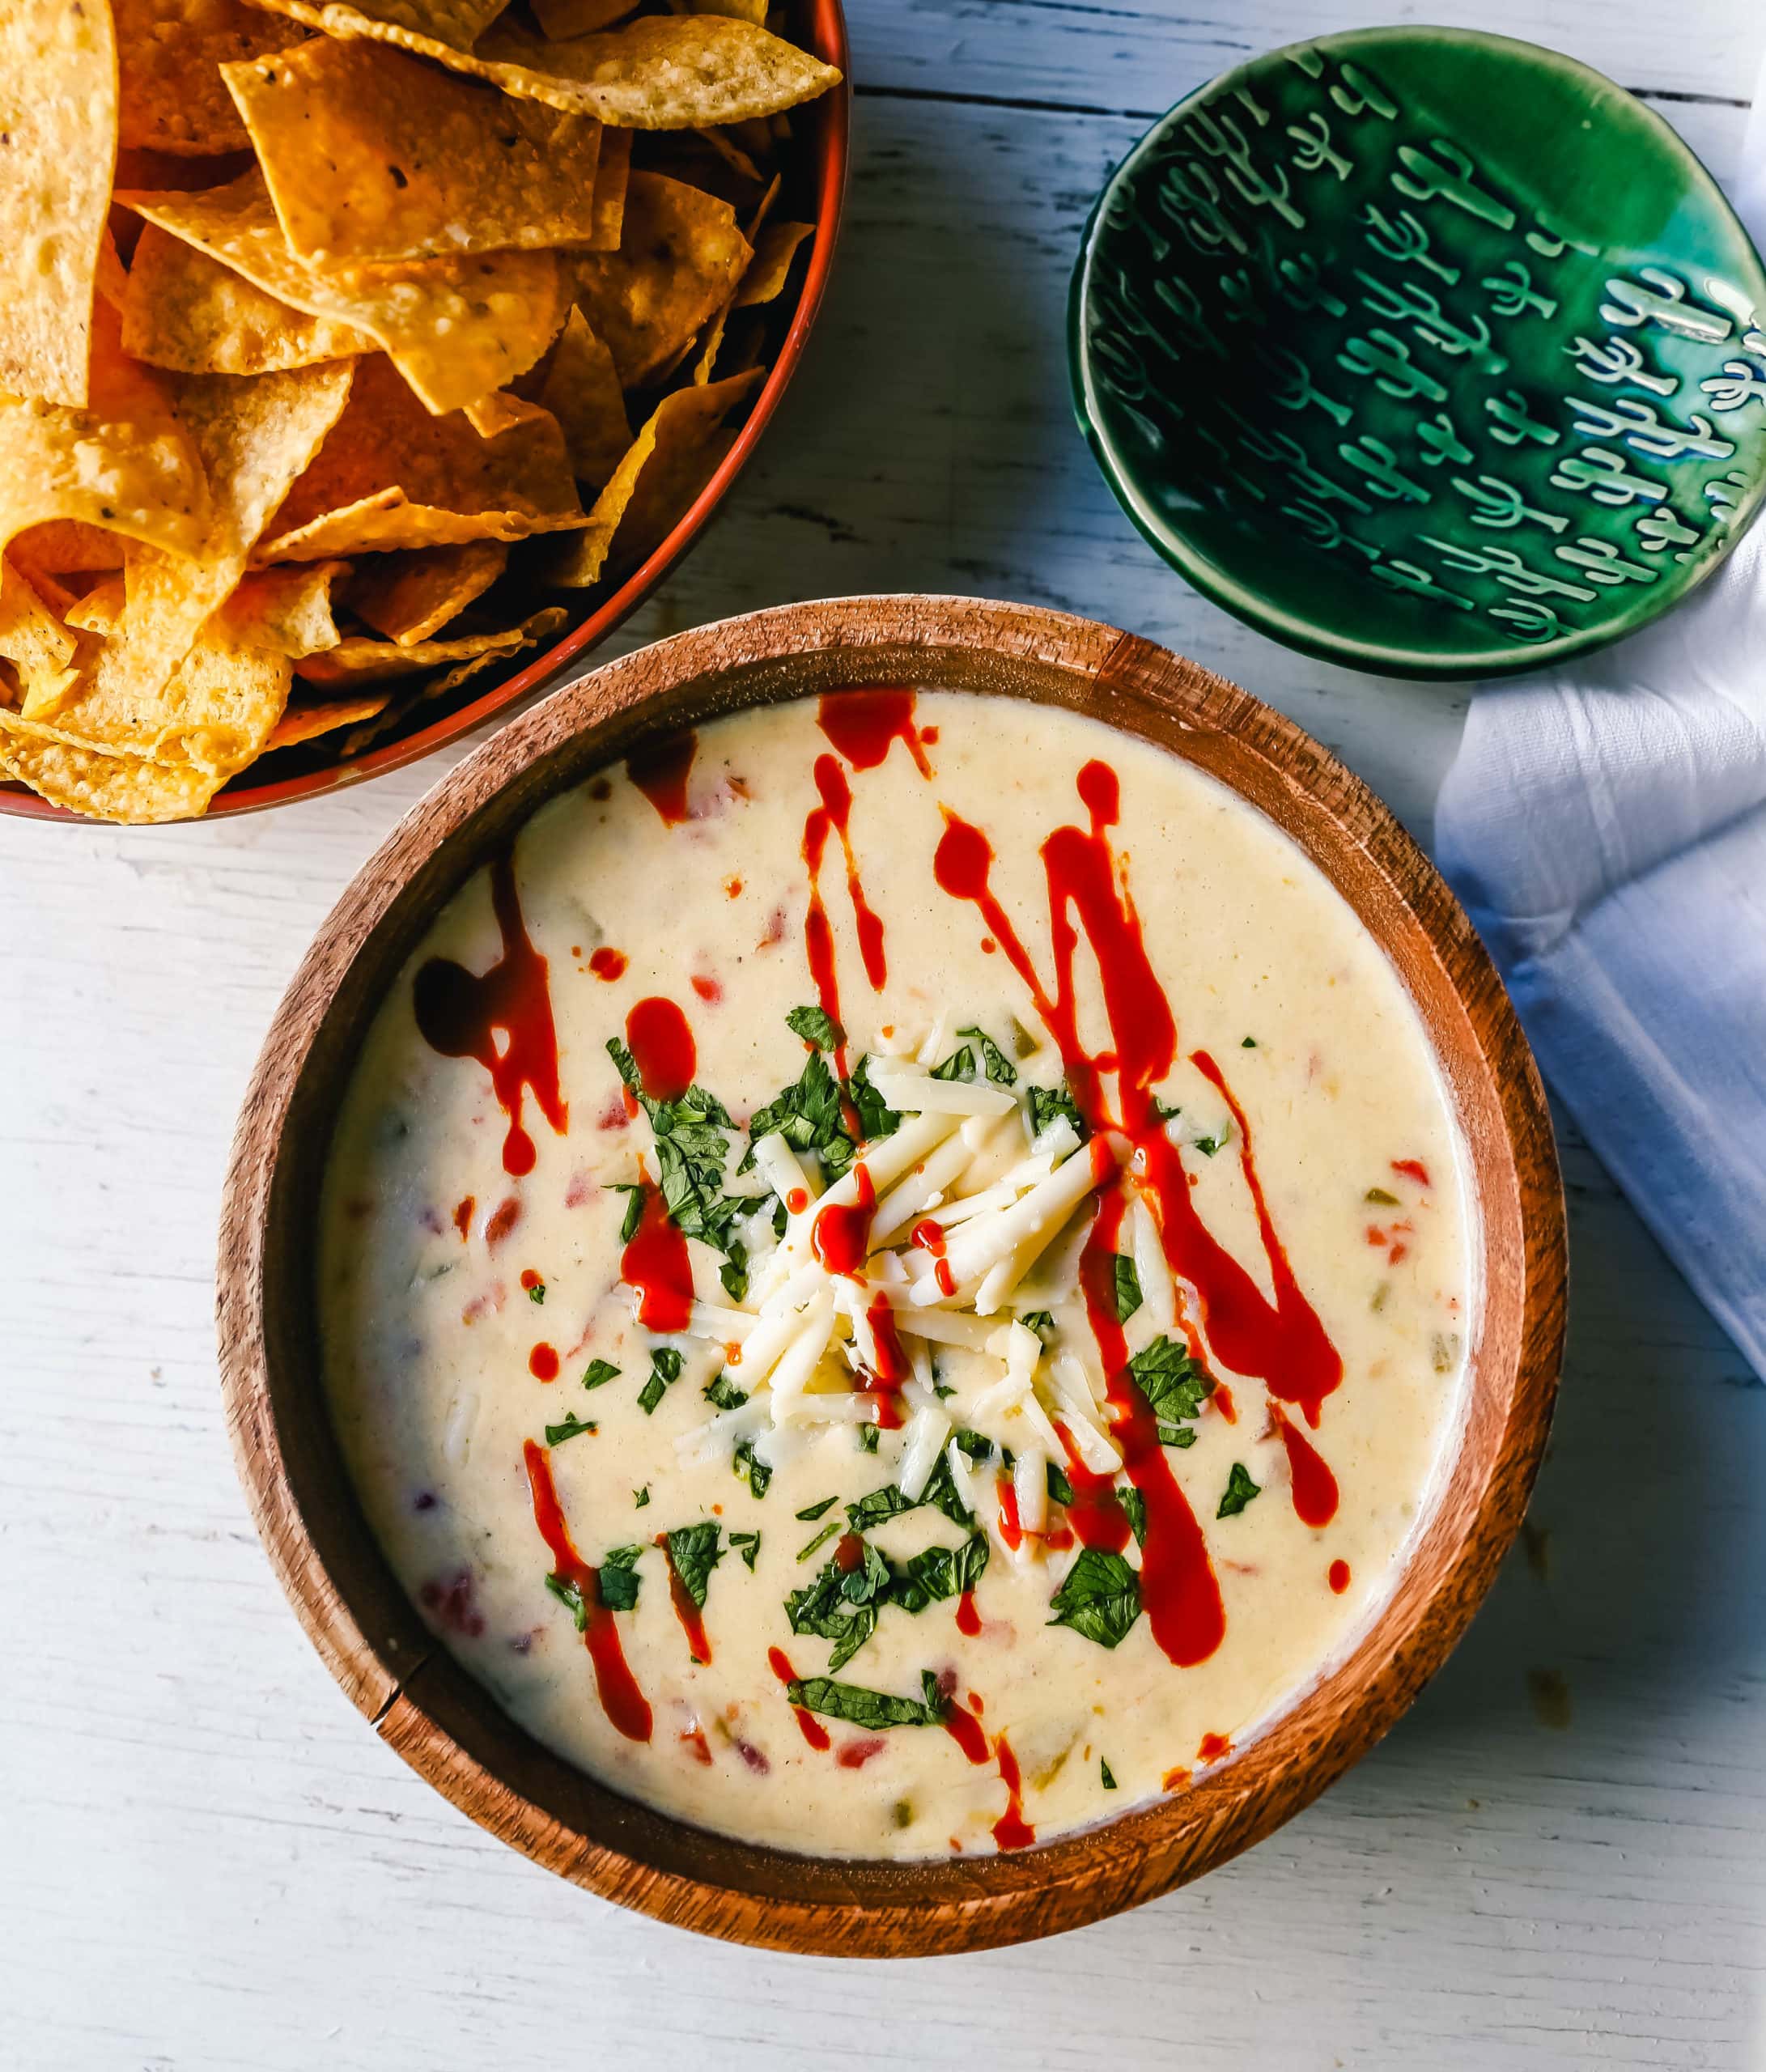 Queso Dip Creamy green chile queso blanco dip made with the perfect blend of cheeses, green chiles, fresh cilantro, and hot sauce. How to make the perfect homemade queso! #queso #cincodemayo #mexican #mexicanfood